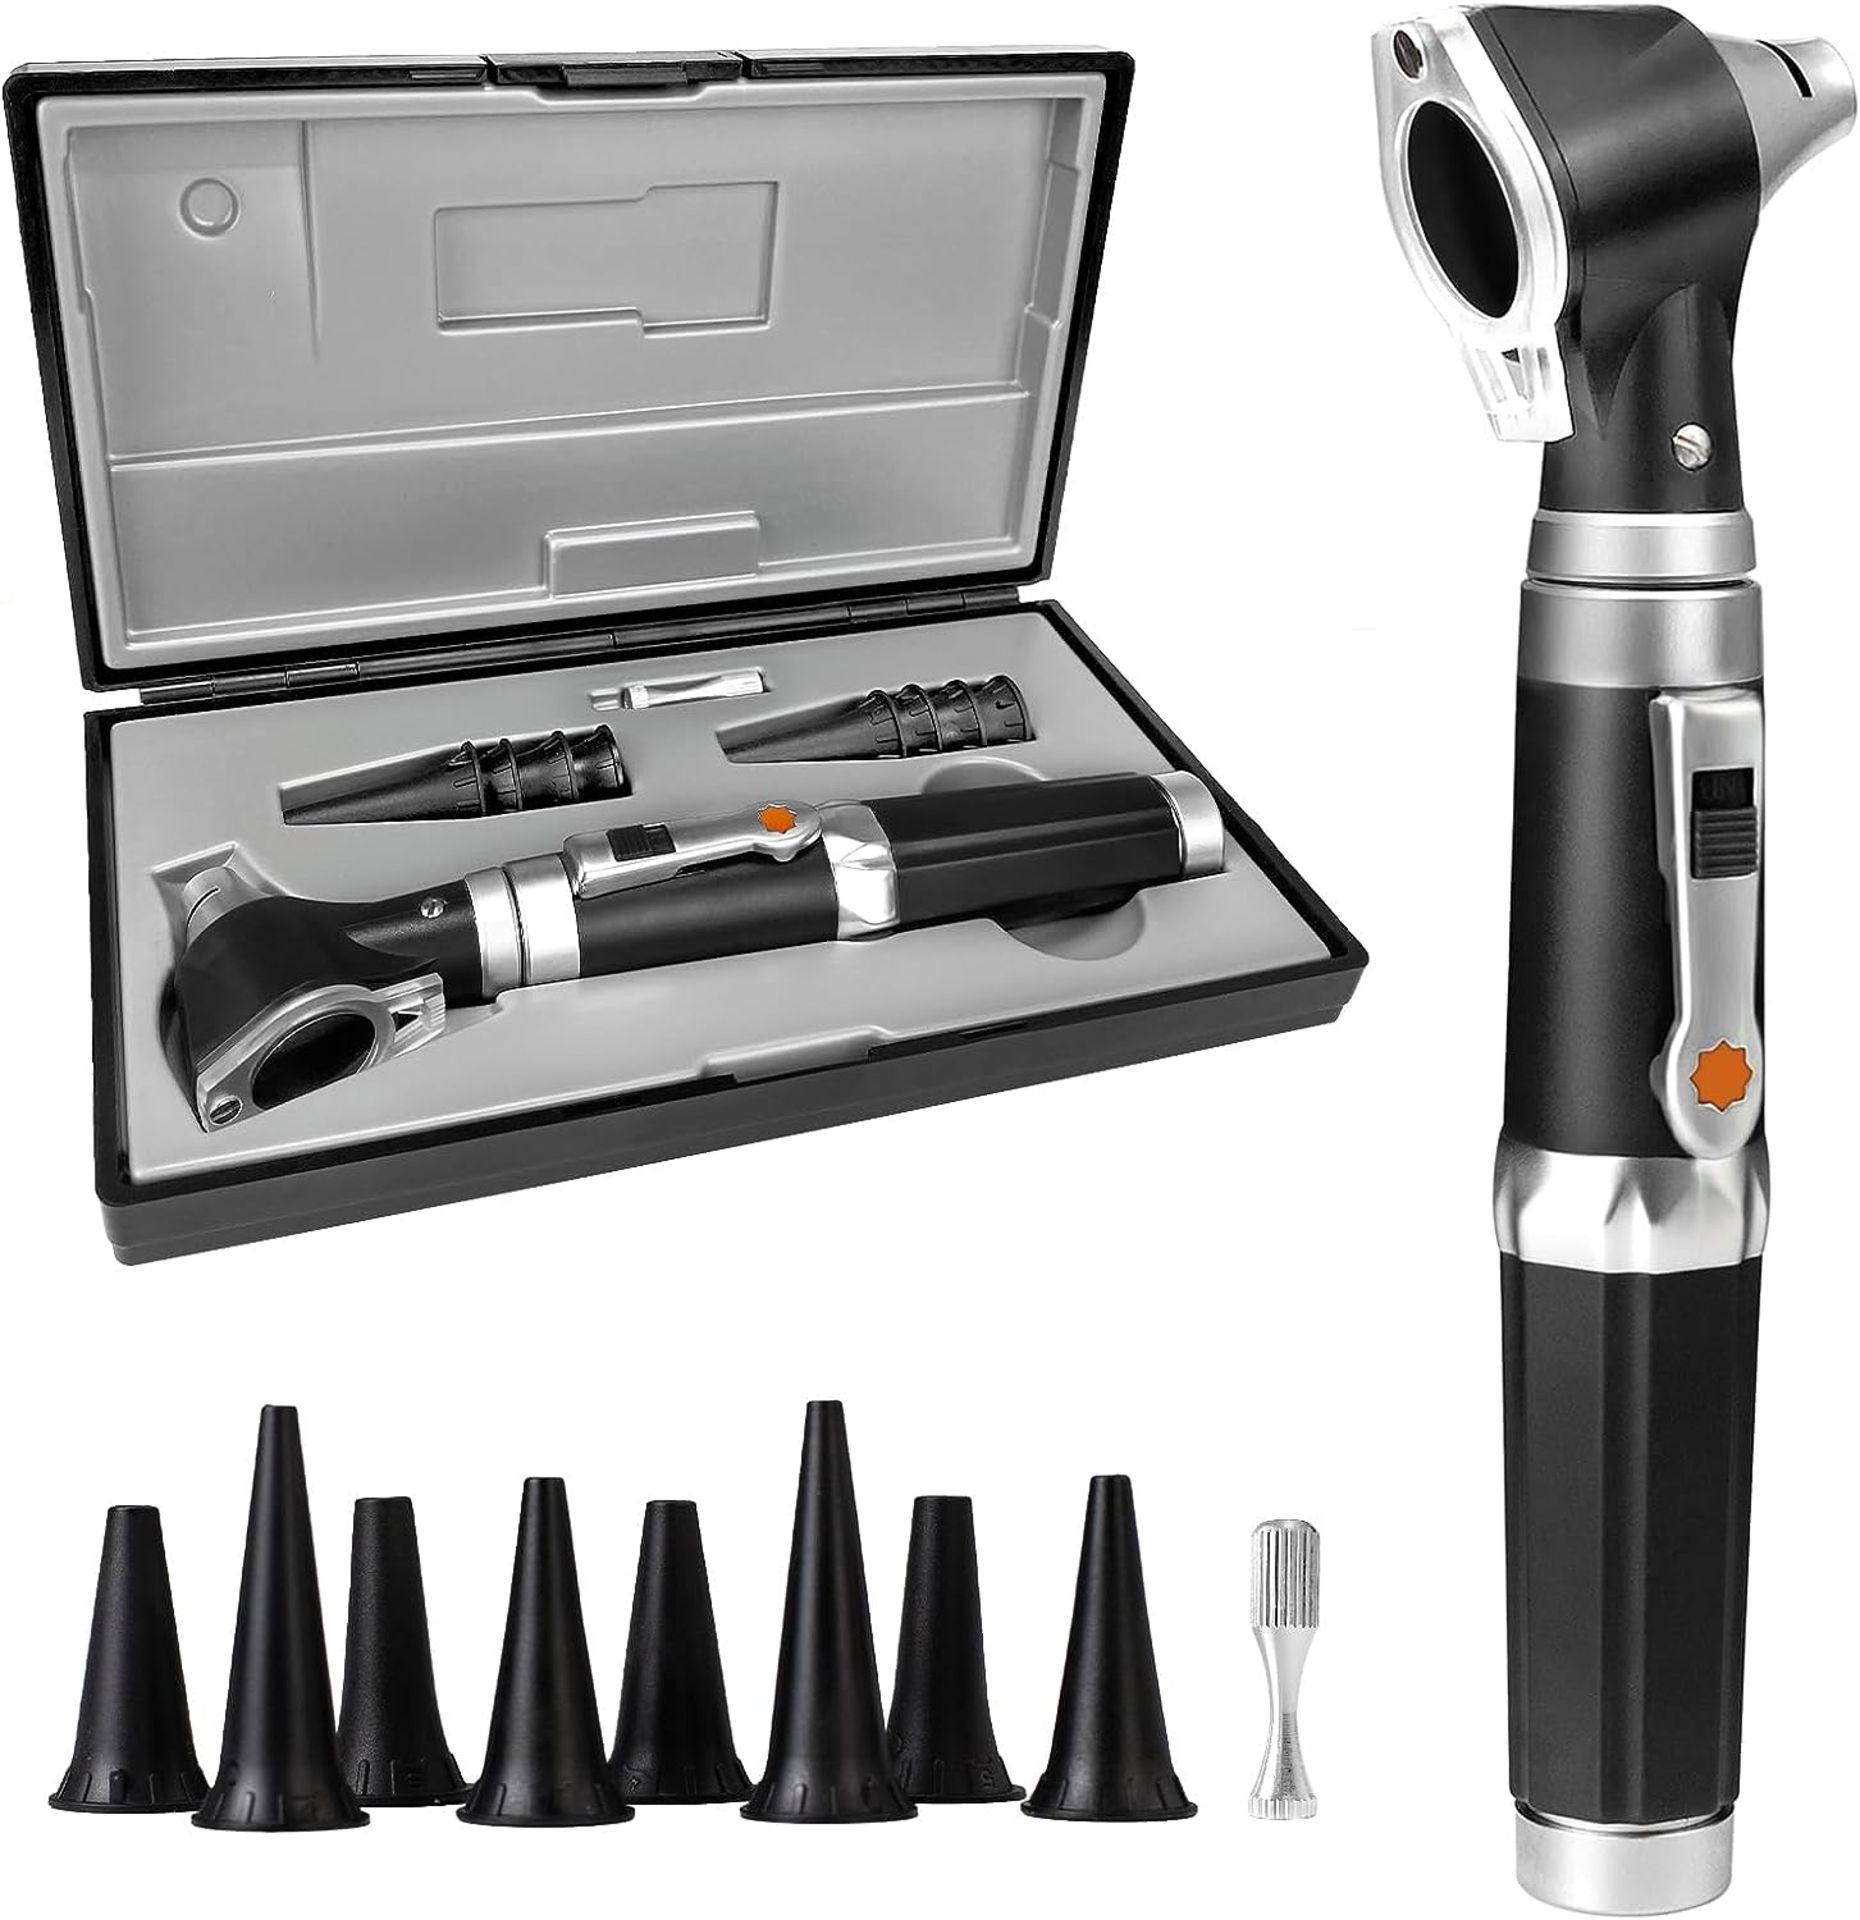 RRP £23.99 SCIAN Otoscope with Light - Ear Infection Detector and Pocket Ear Scope - Includes Hard